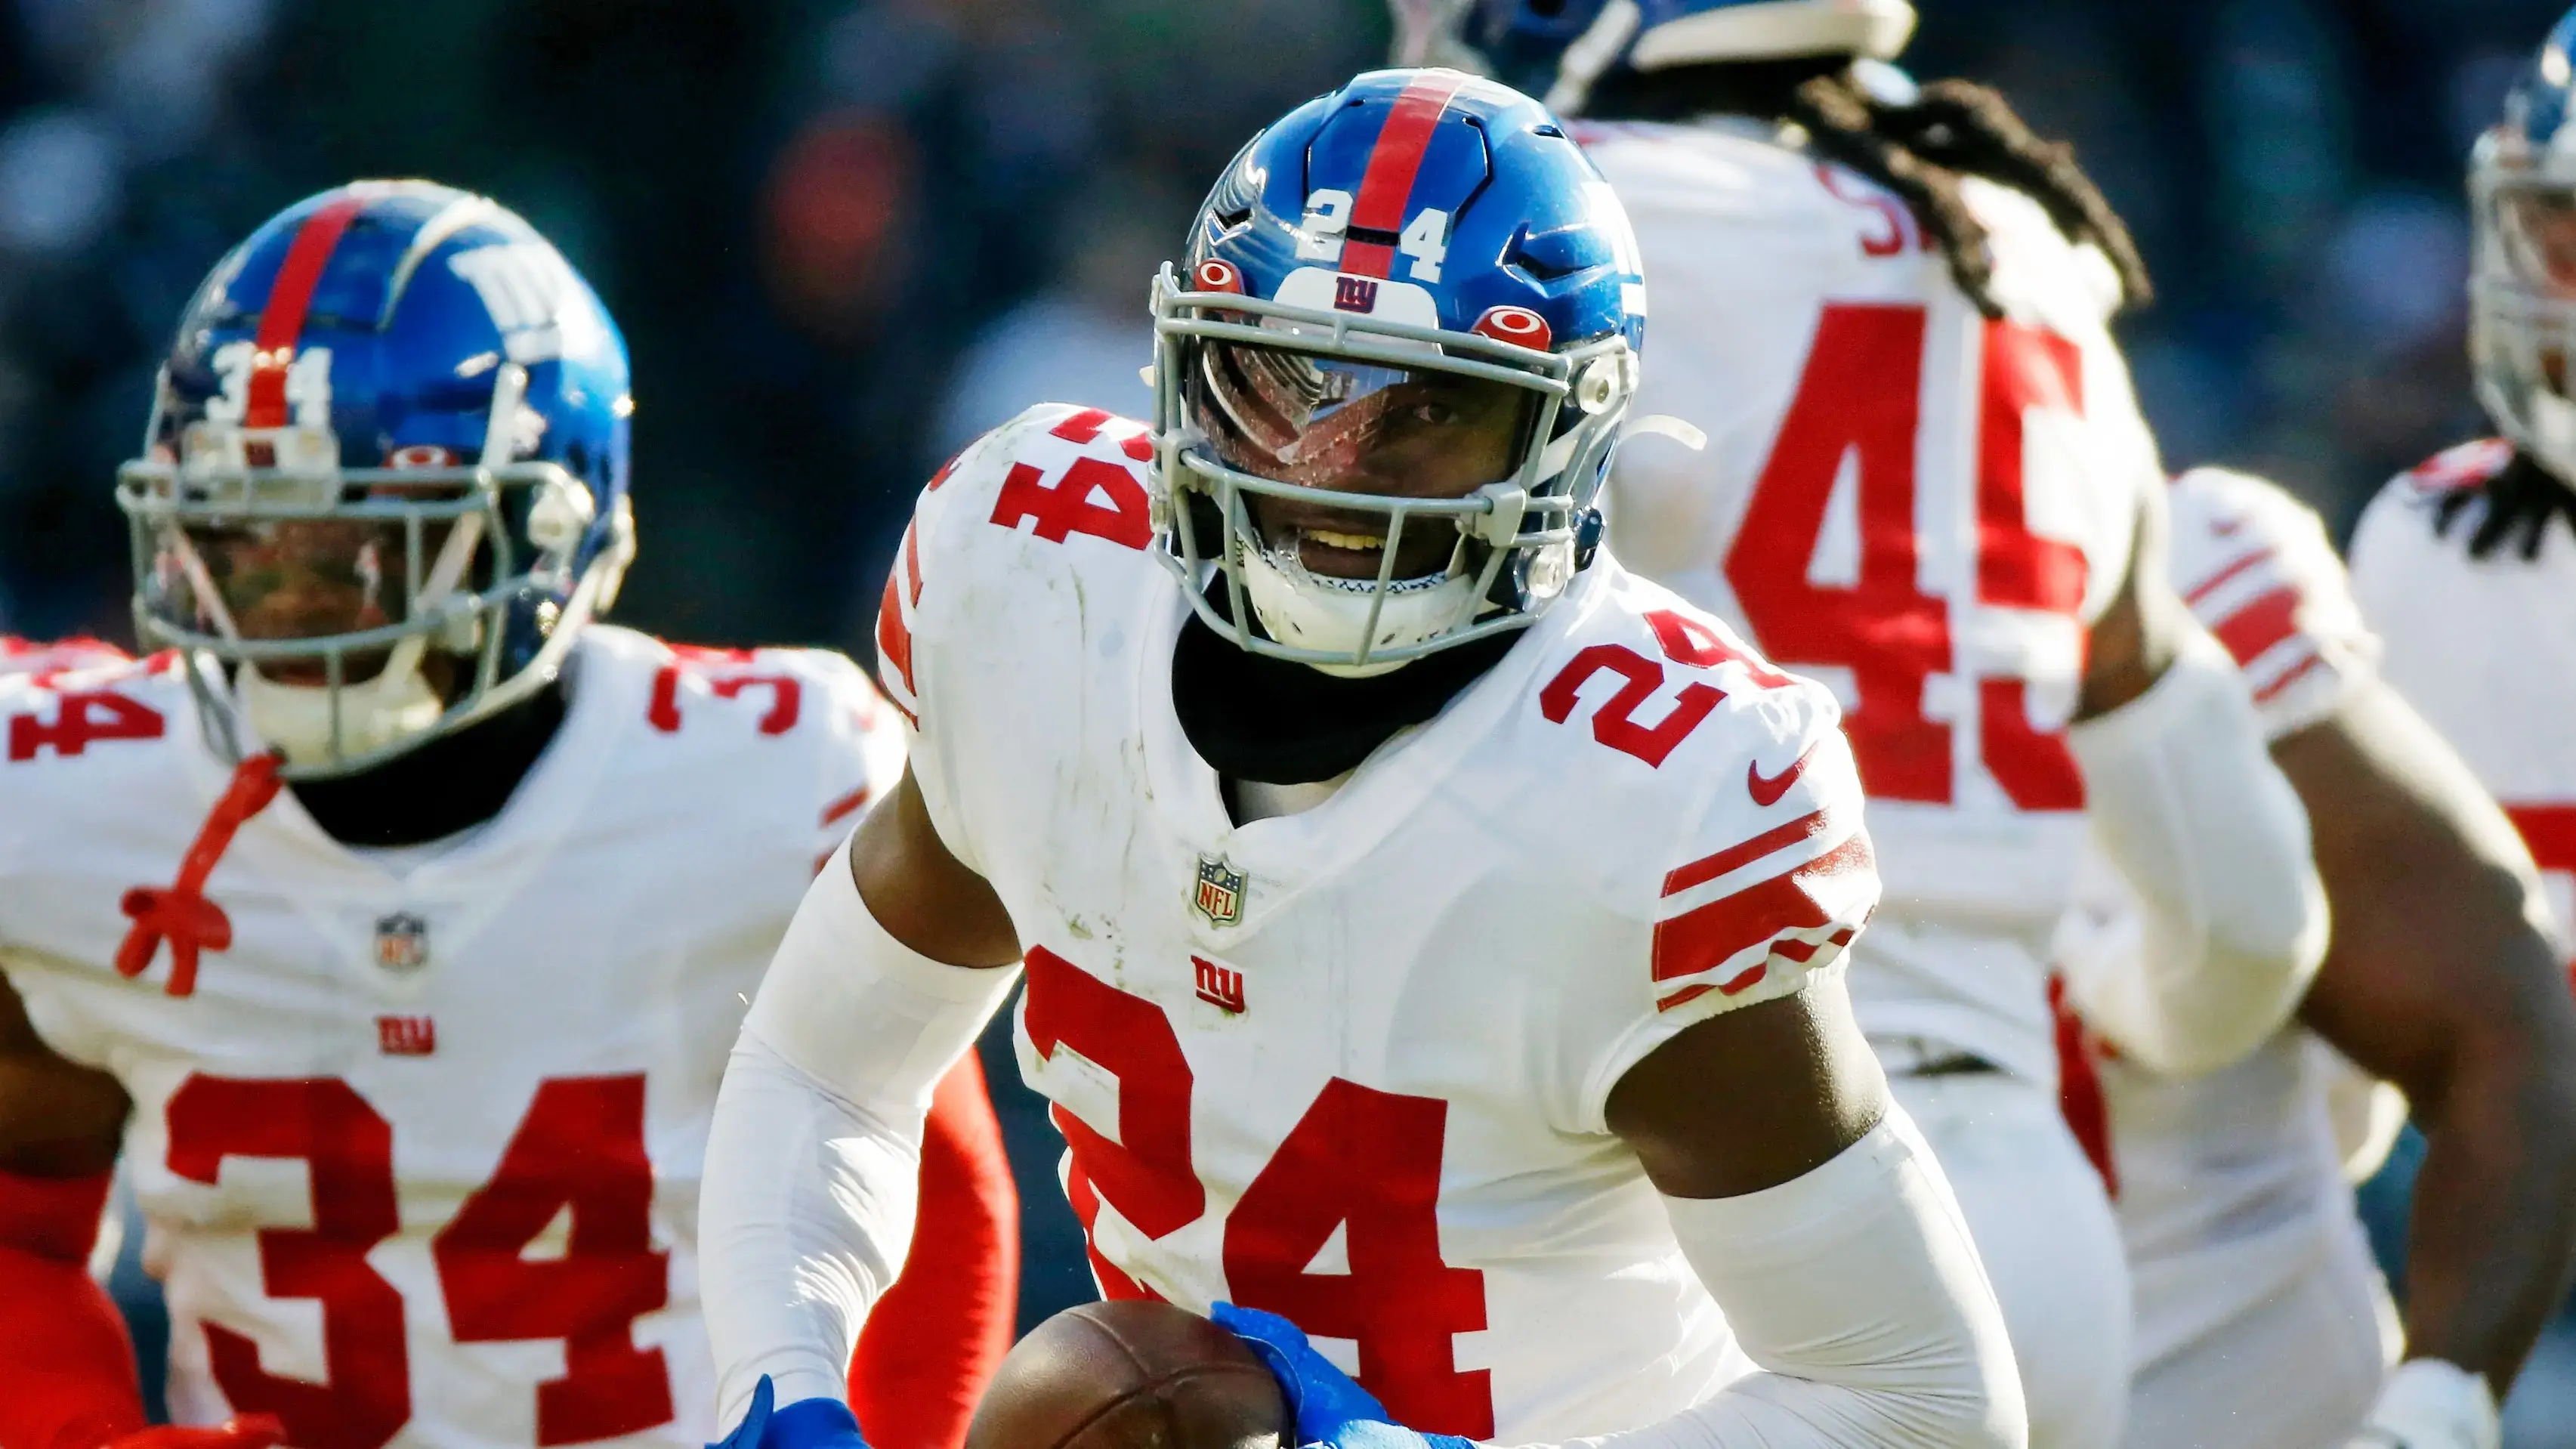 New York Giants cornerback James Bradberry (24) reacts after intercepting a pass against the Chicago Bears during the second half at Soldier Field. / Jon Durr- USA TODAY Sports